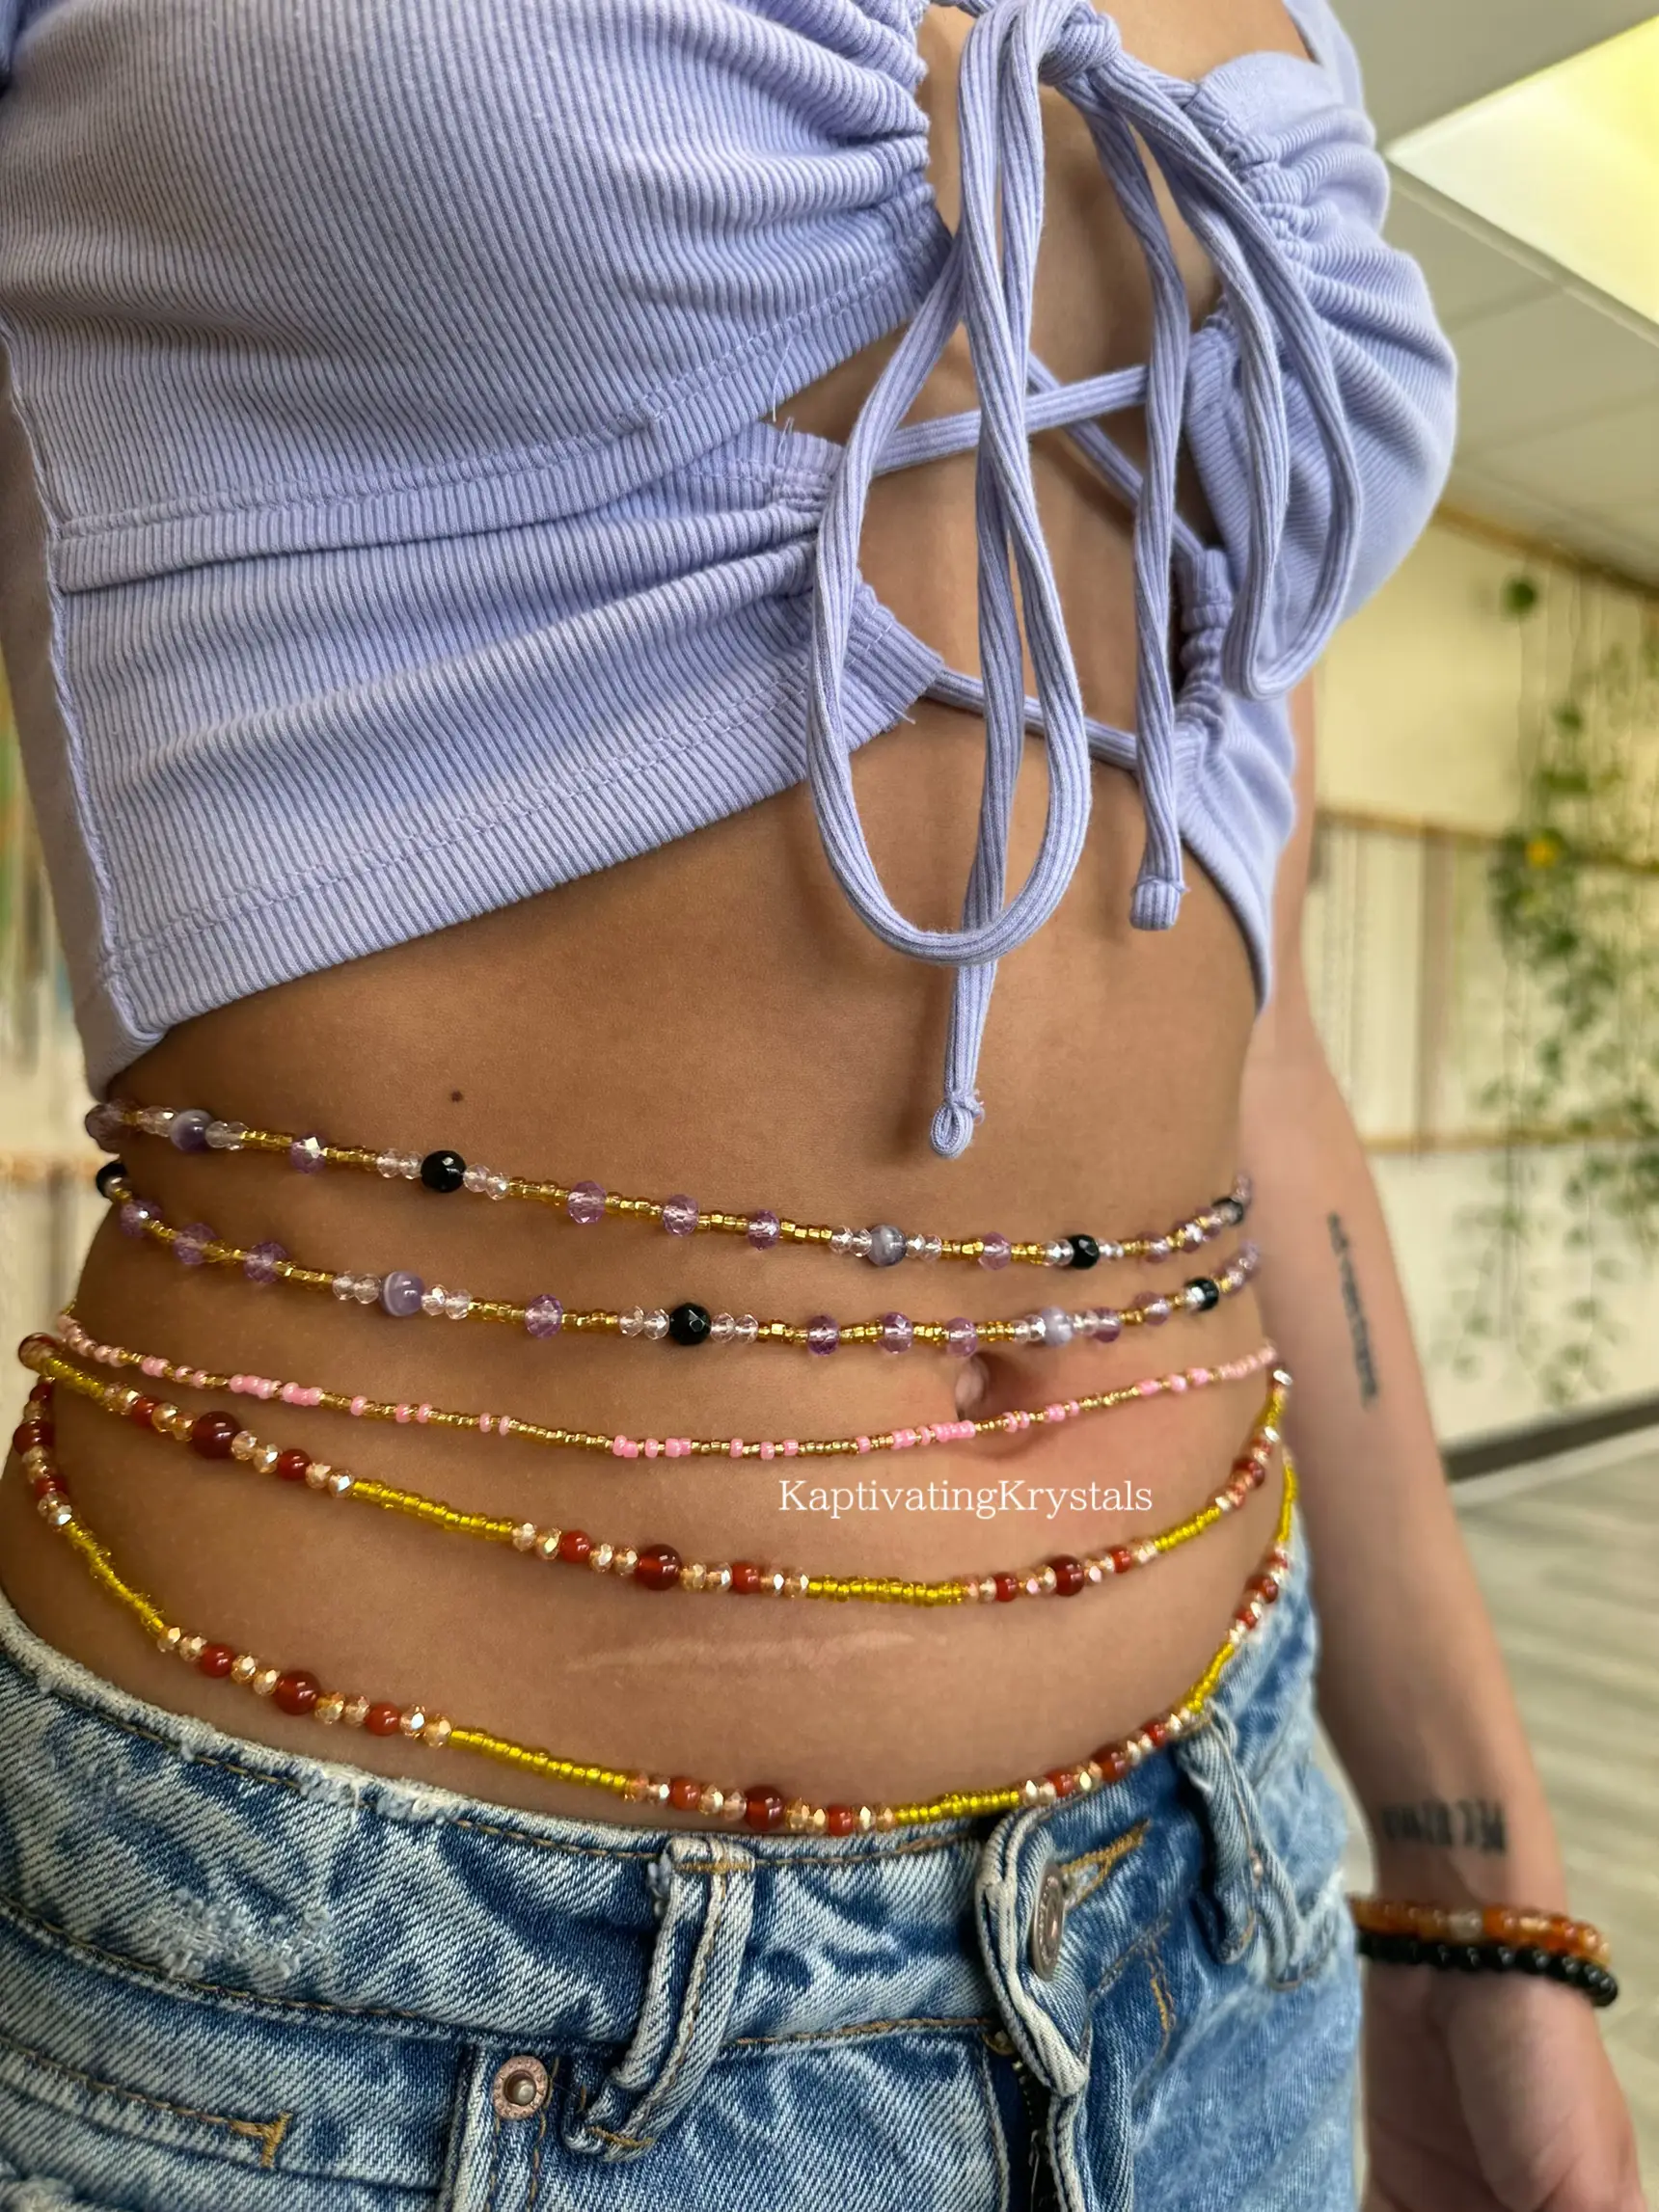 Authentic African waist beads - Blessed Chakra waist beads